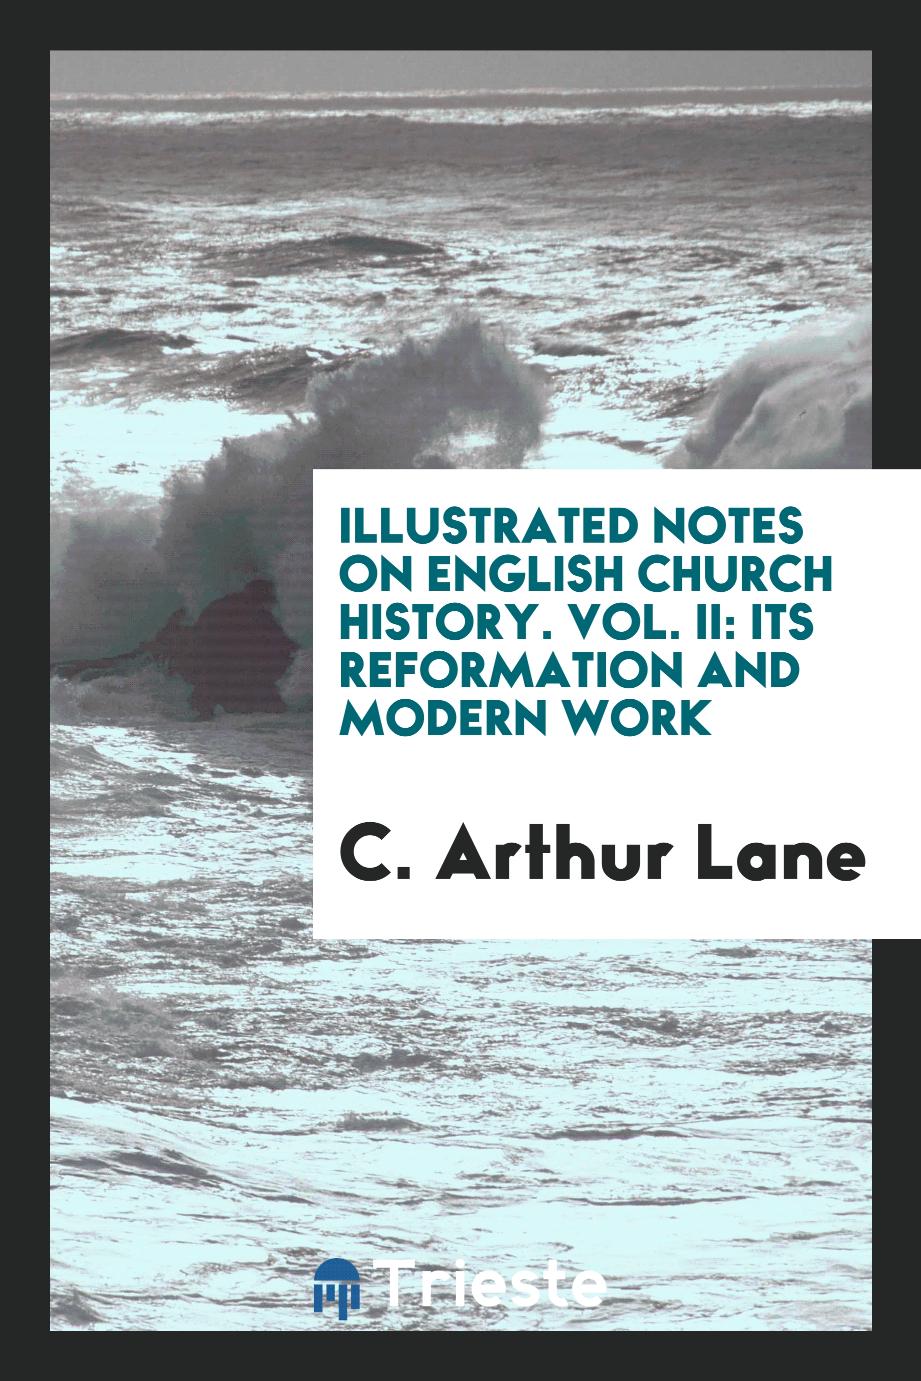 Illustrated Notes on English Church History. Vol. II: Its Reformation and Modern Work